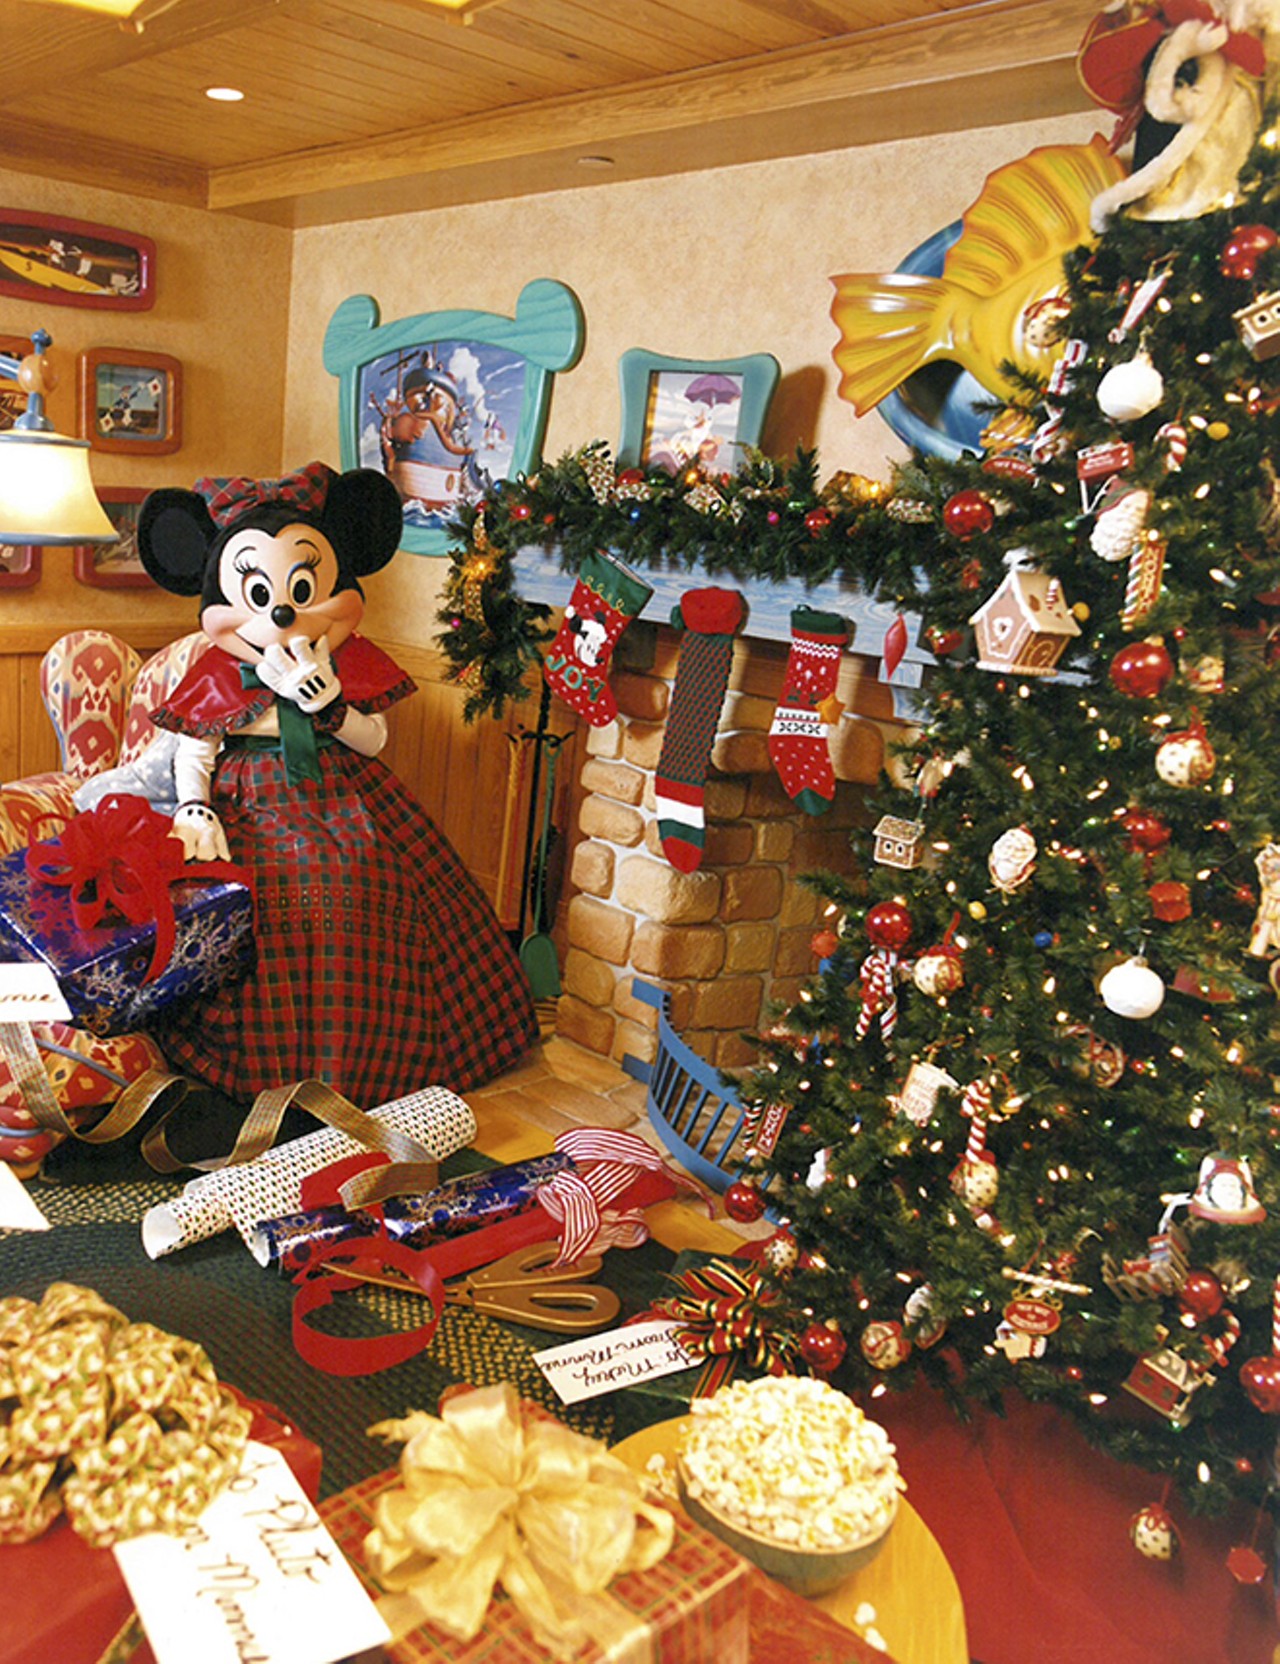 28 photos of Christmas at Disney World in the early '90s